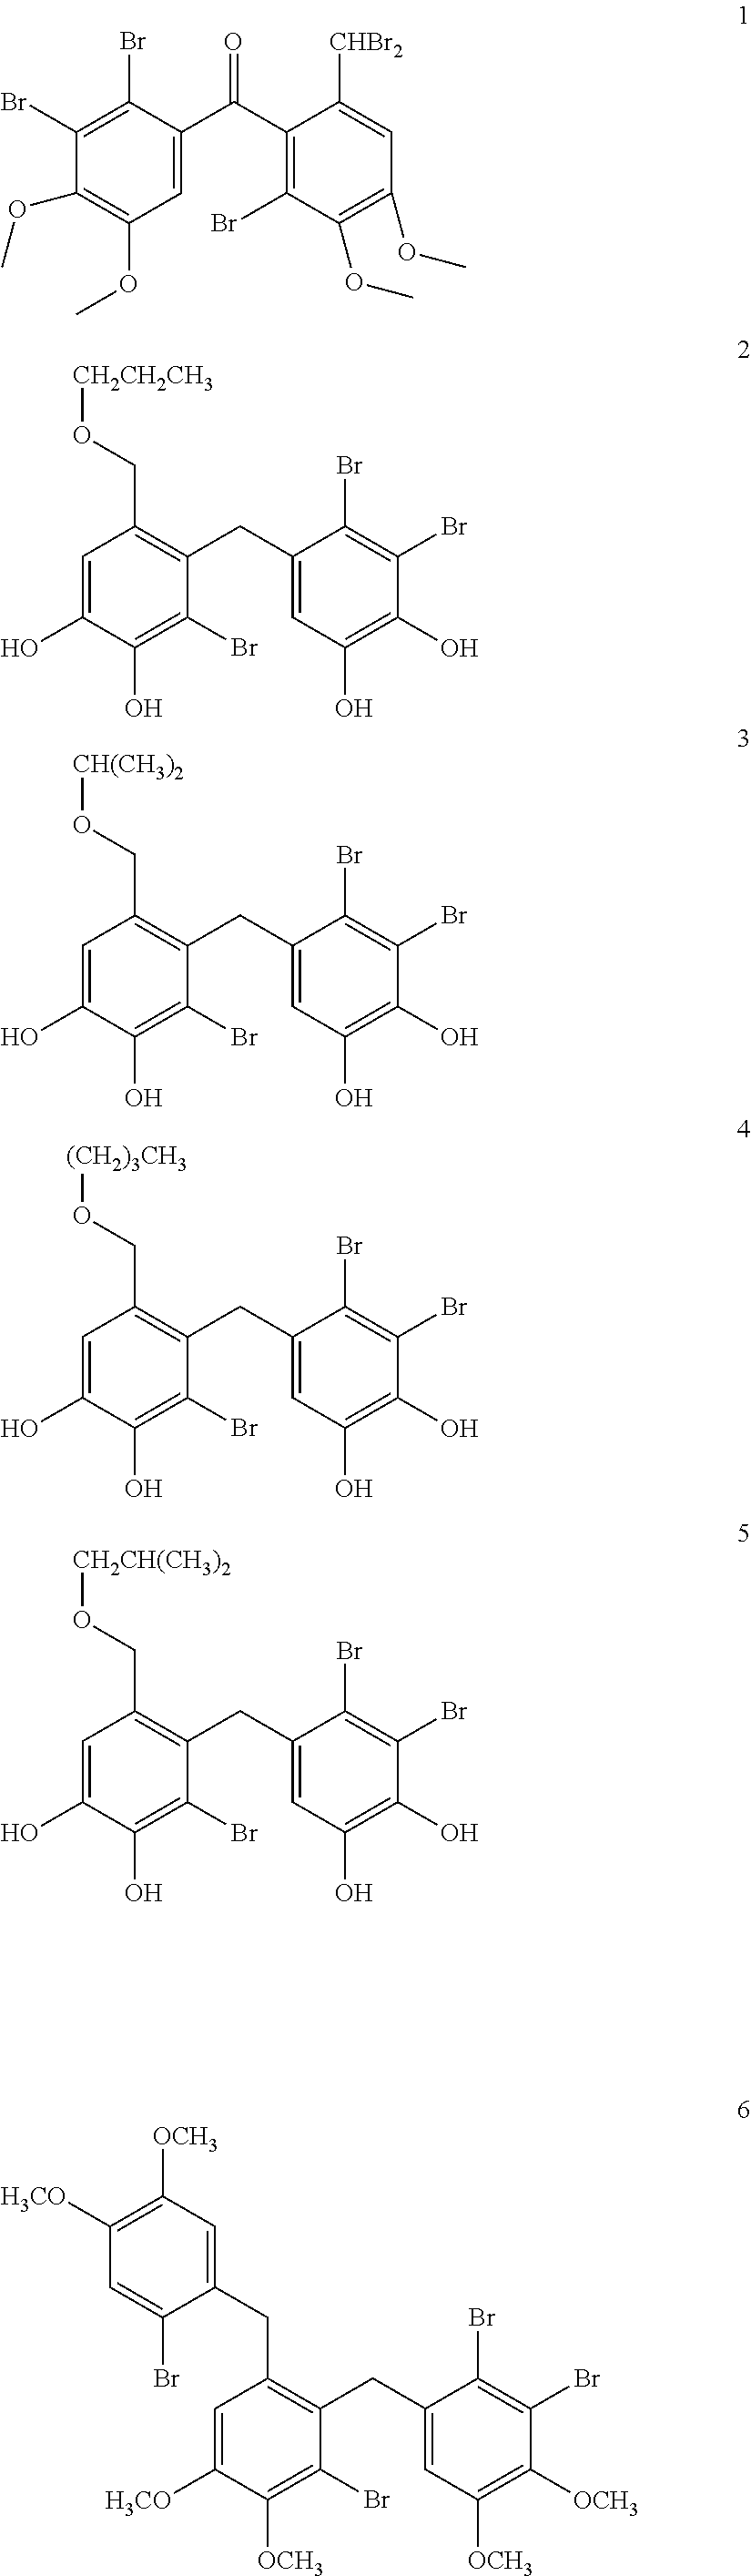 Ptp1b inhibitors, synthesis thereof and application thereof in preparation of medicaments for treating type 2 diabetes mellitus